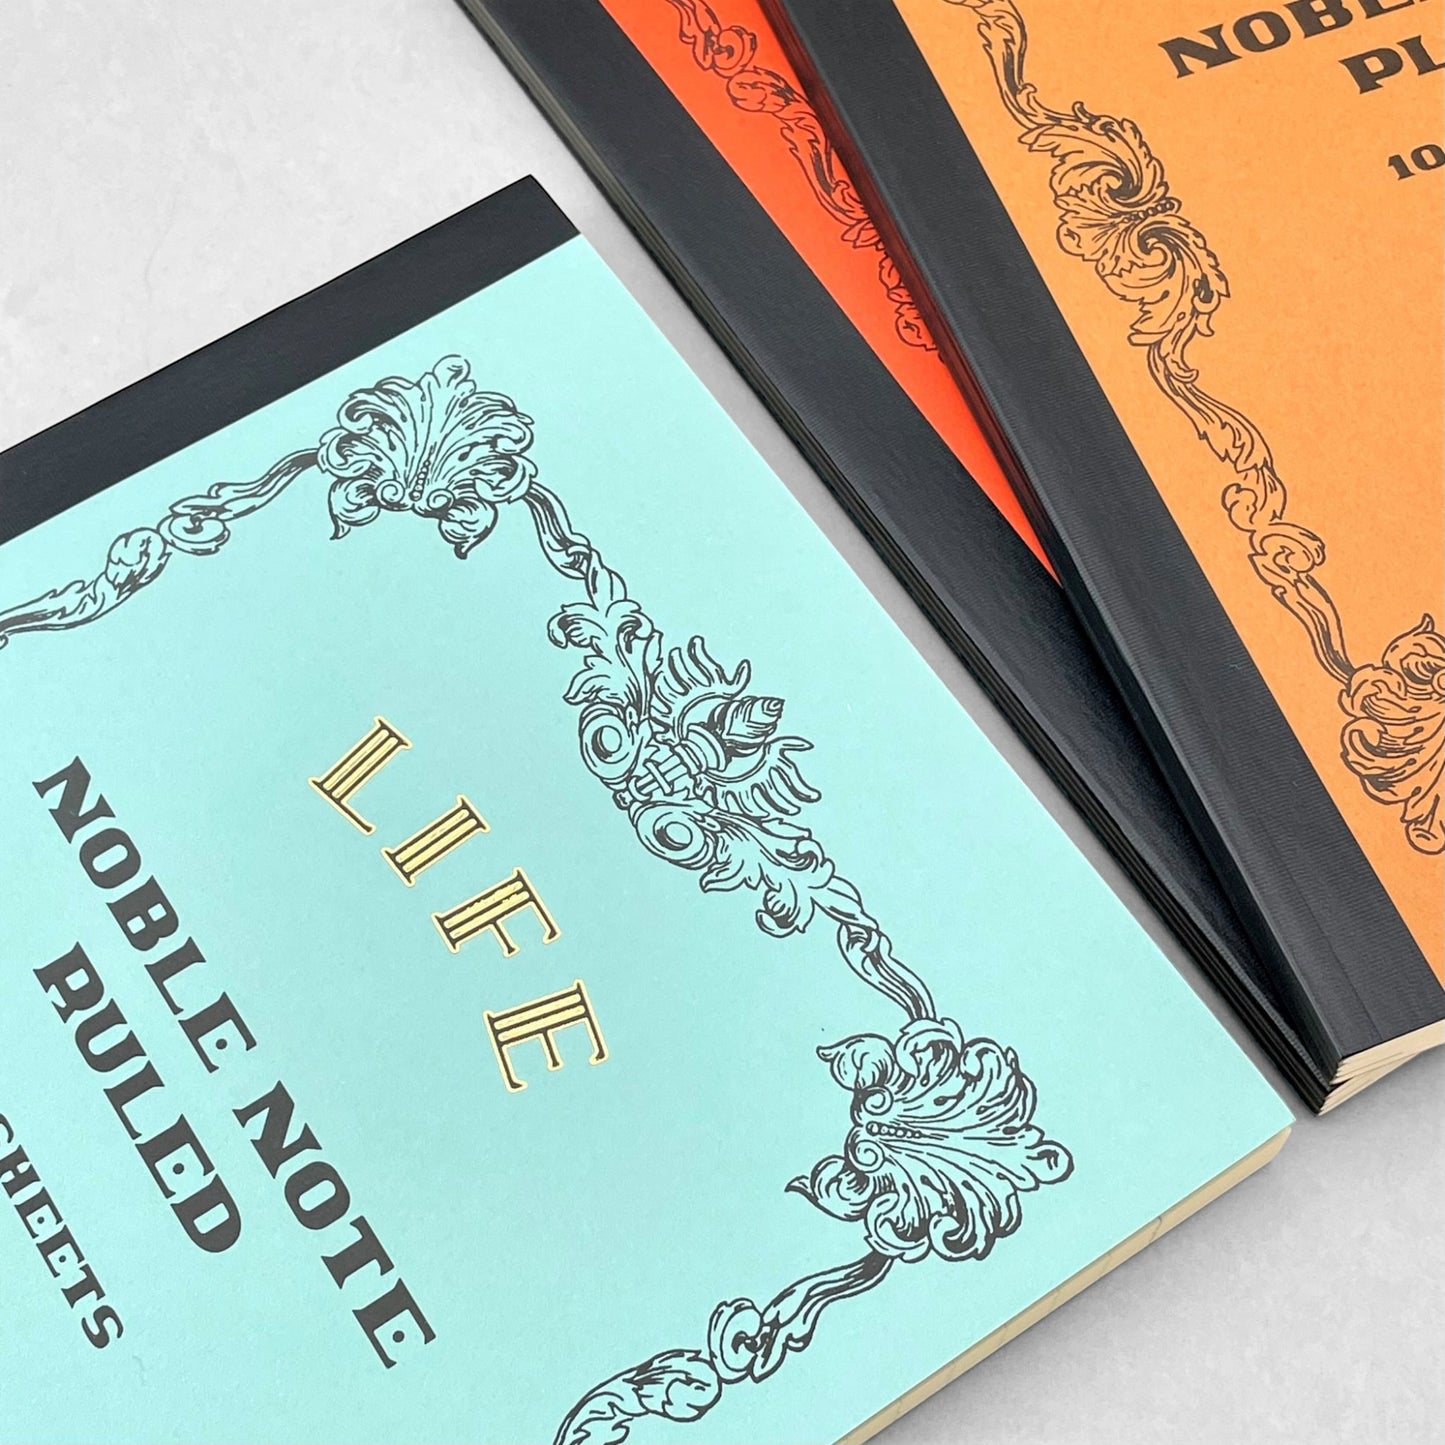 Softcover notebook with lined pages. The cover is plain aqua with a decorative black border and branding, Life Noble Ruled by Japanese brand Life